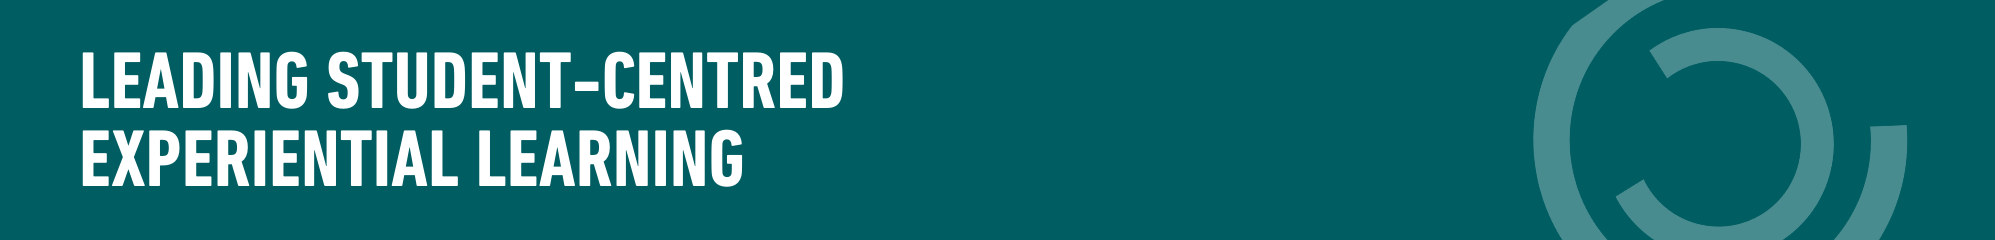 Dark teal background with circle motif and text "Leading Sudent-Centred Experiential Learning"